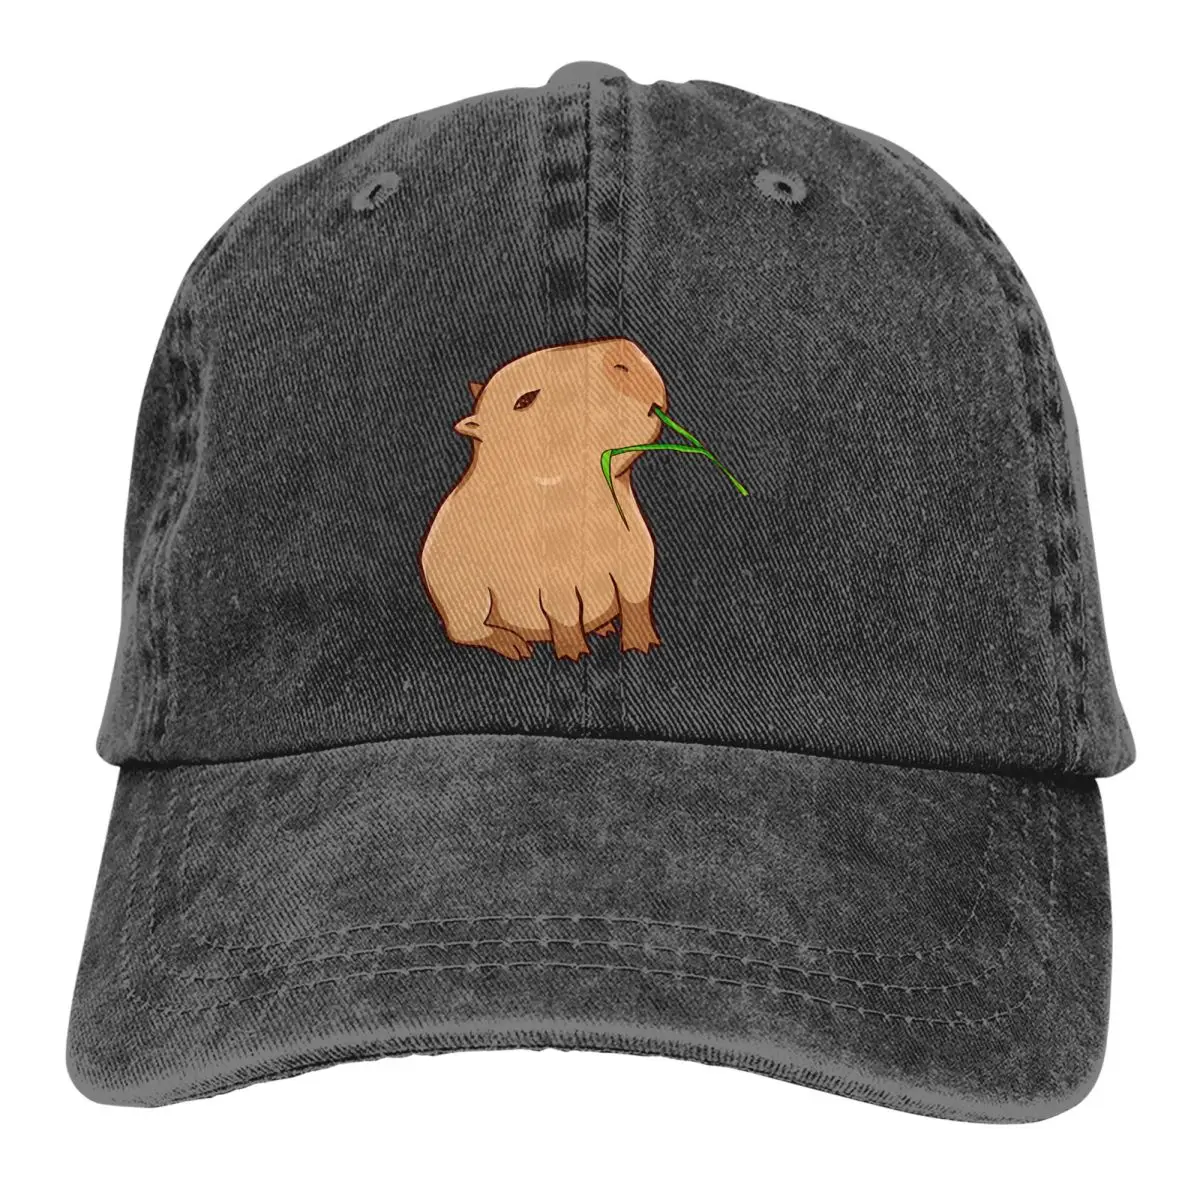 

Pure Color Dad Hats With A Leaf Eat Your Greens Women's Hat Sun Visor Baseball Caps Capybara Animal Peaked Cap